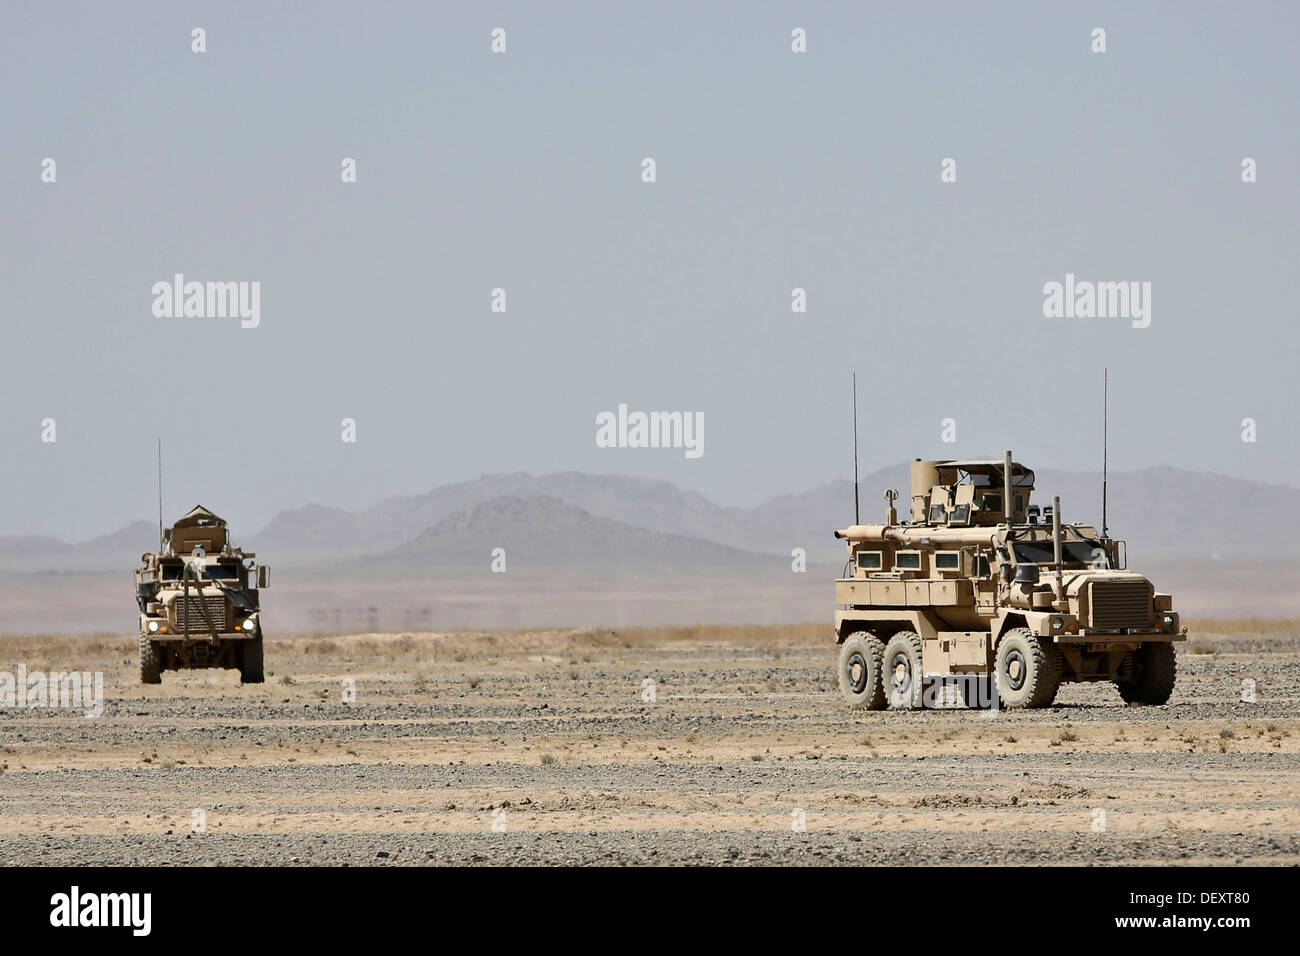 Afghan National Army (ANA) and Coalition Forces conduct patrols in Barrmo, Washir district, Afghanistan, Sept. 19, 2013. The ANA and Coalition Forces conducted mounted and dismounted patrolling and engaged local nationals to prevent insurgency. Stock Photo